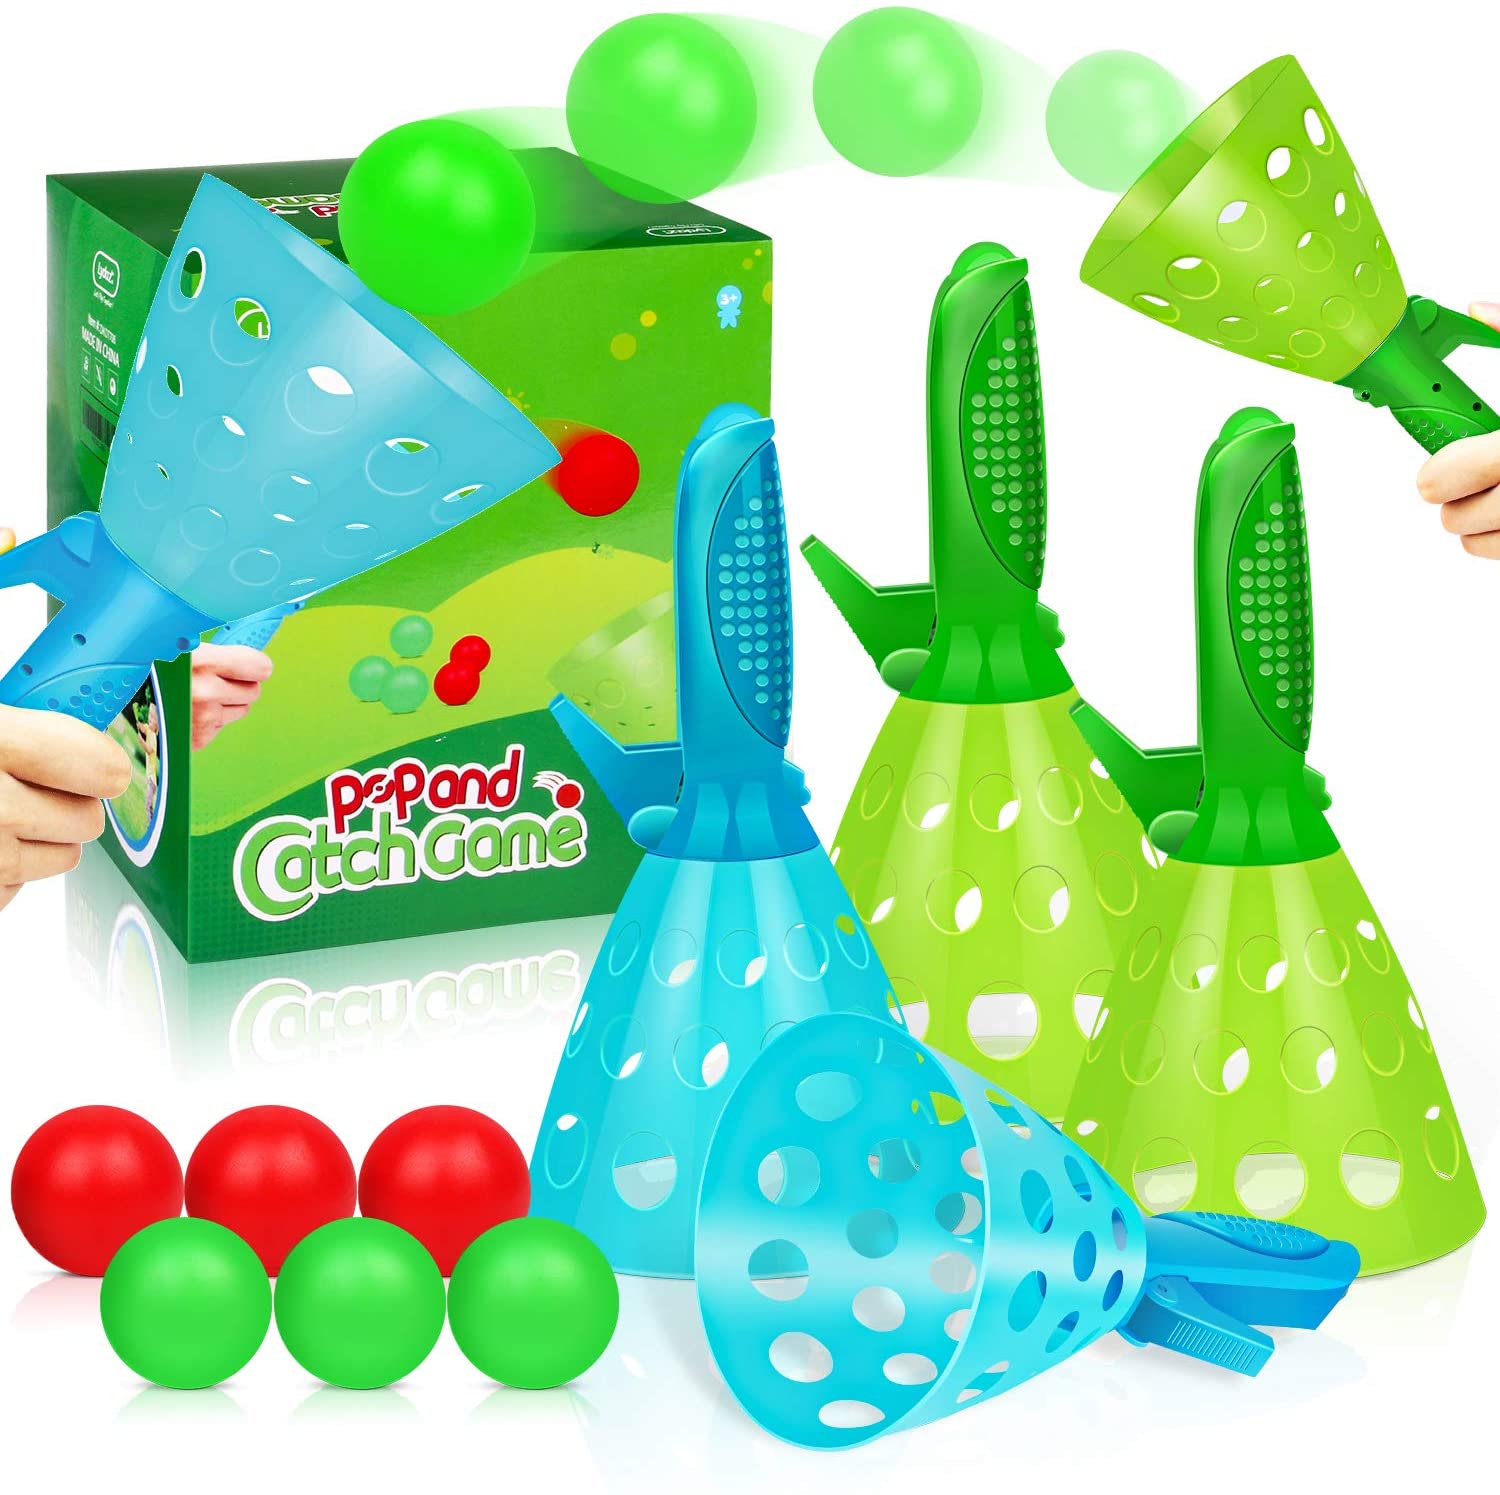 Outdoor Indoor Game Activities for Kids, Pop-Pass-Catch Ball Game with 4 Catch Launcher Baskets and 6 Balls, Valentines Day Gifts Birthday Party Favors Beach Toys for Kids Age 5 6 7 8 9 10+ and Adults